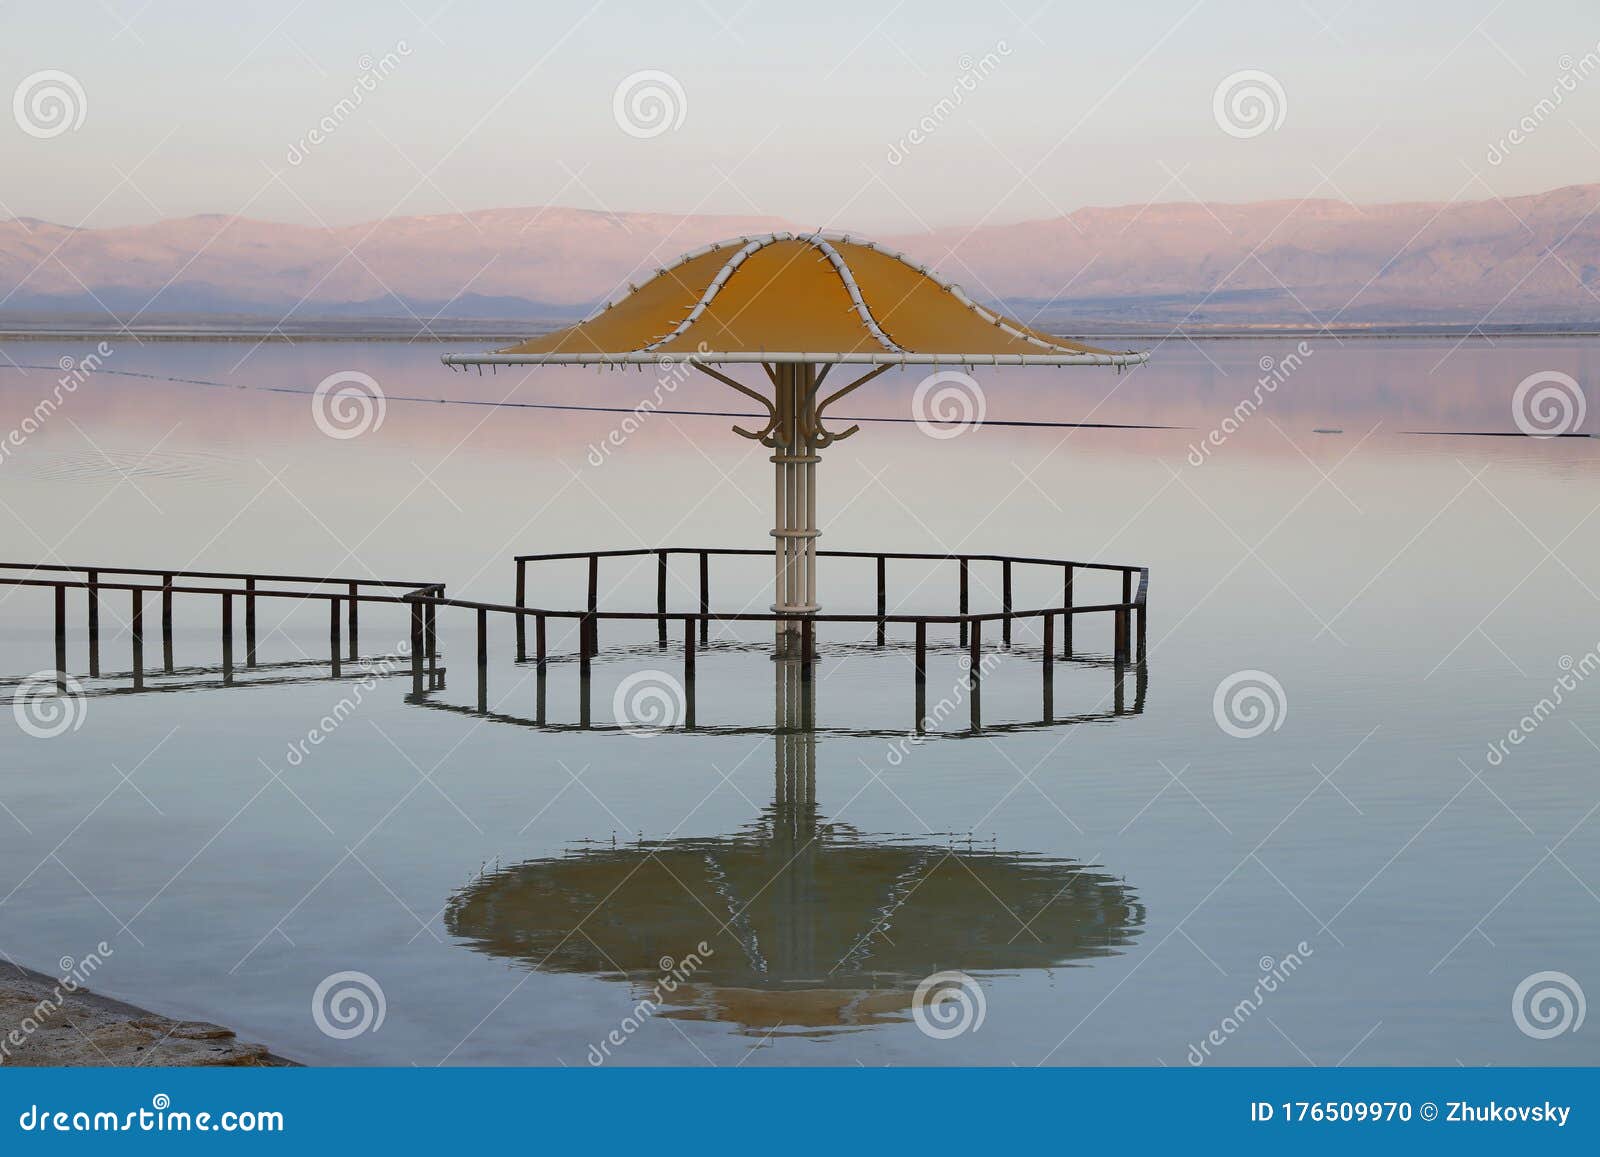 gazebo for sun protection reflected in dead sea water at sunset